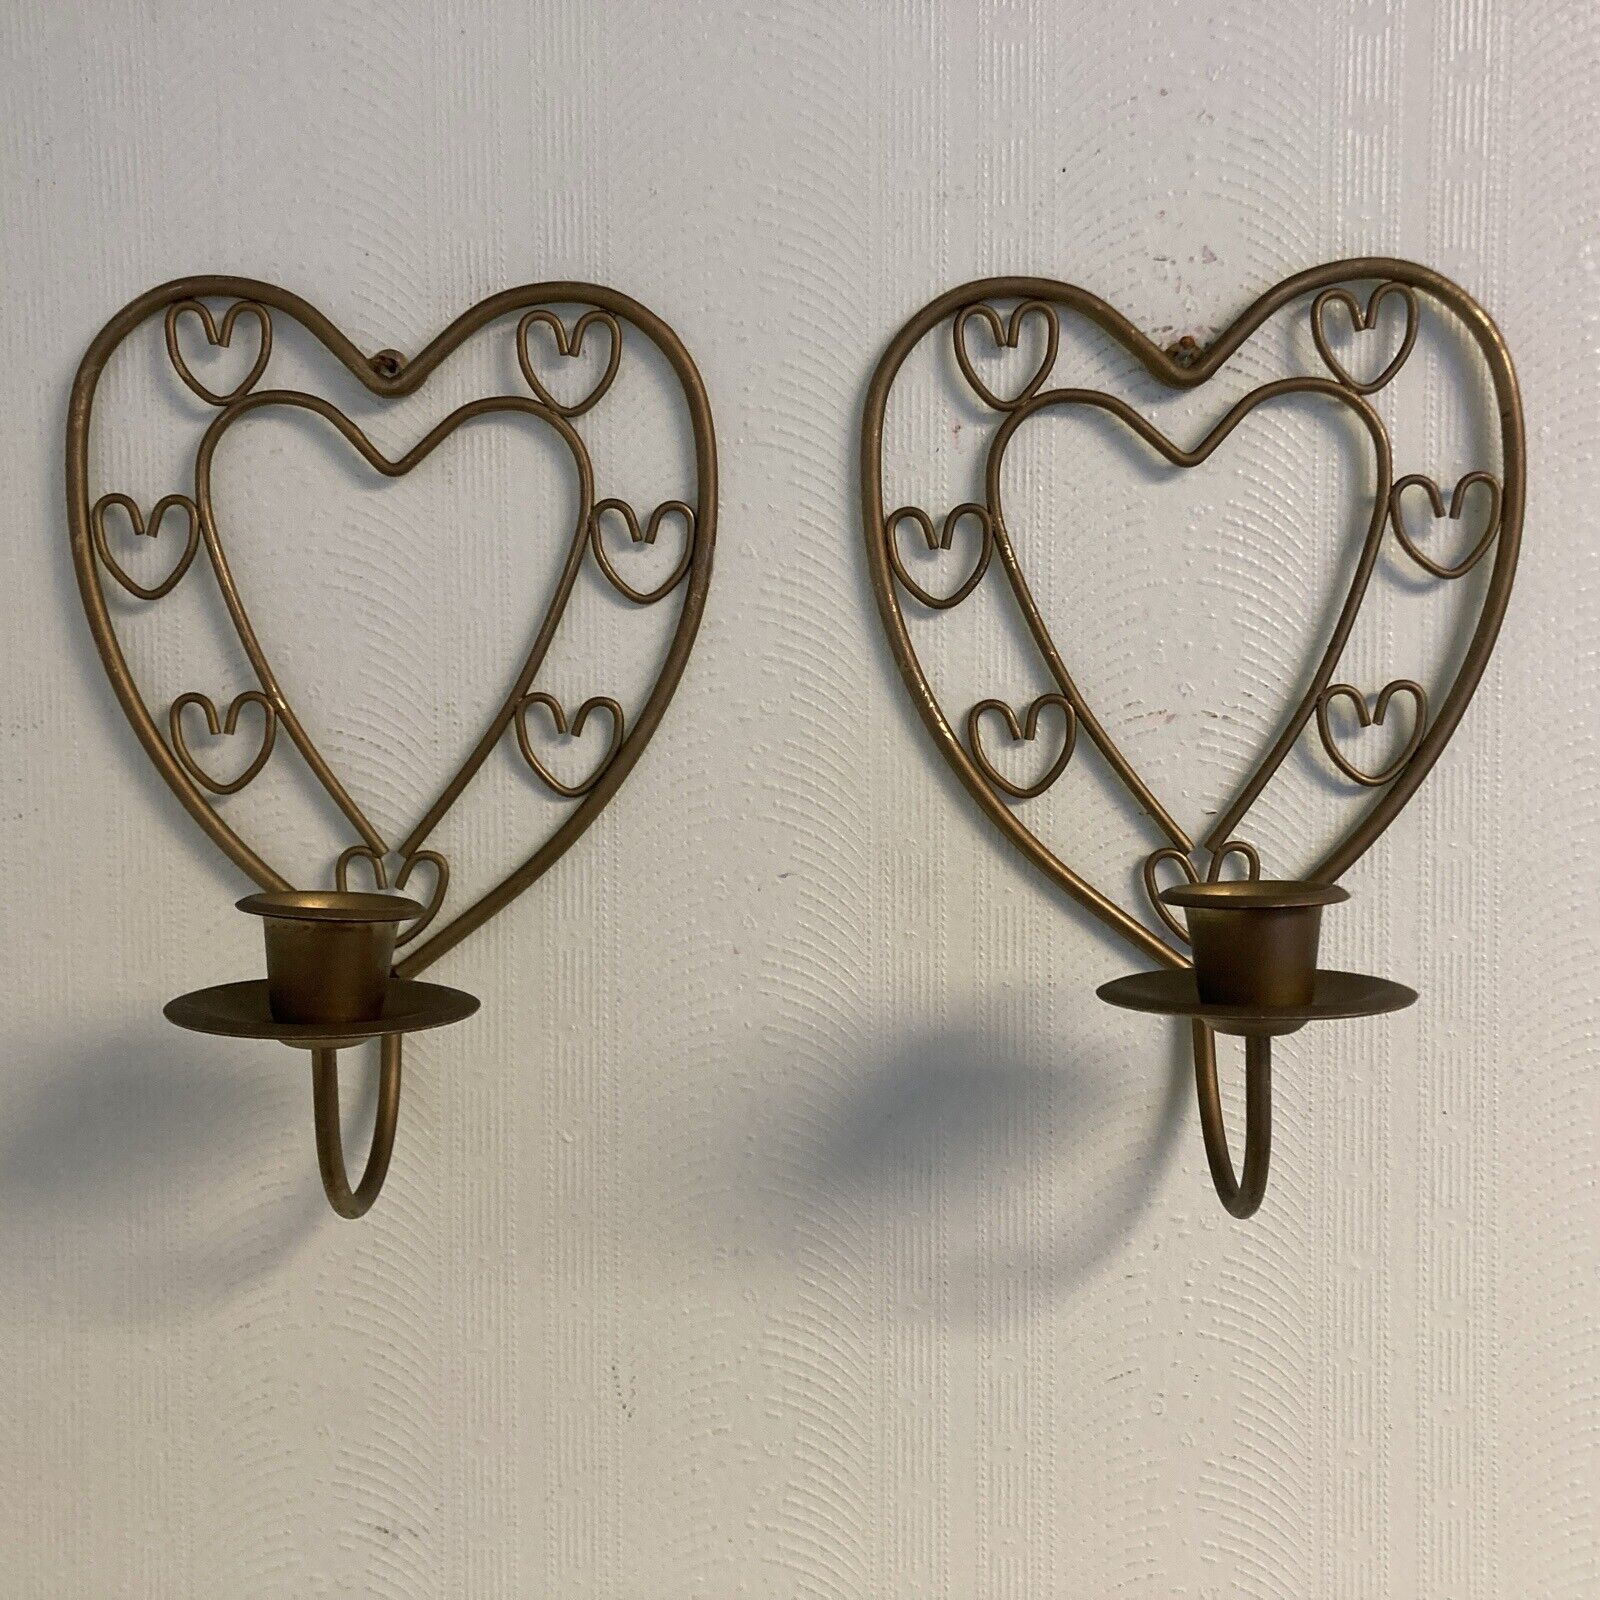 Vintage Pair Brass Heart Shaped Wall Sconce Candle Holder Decor Set Valentine’s